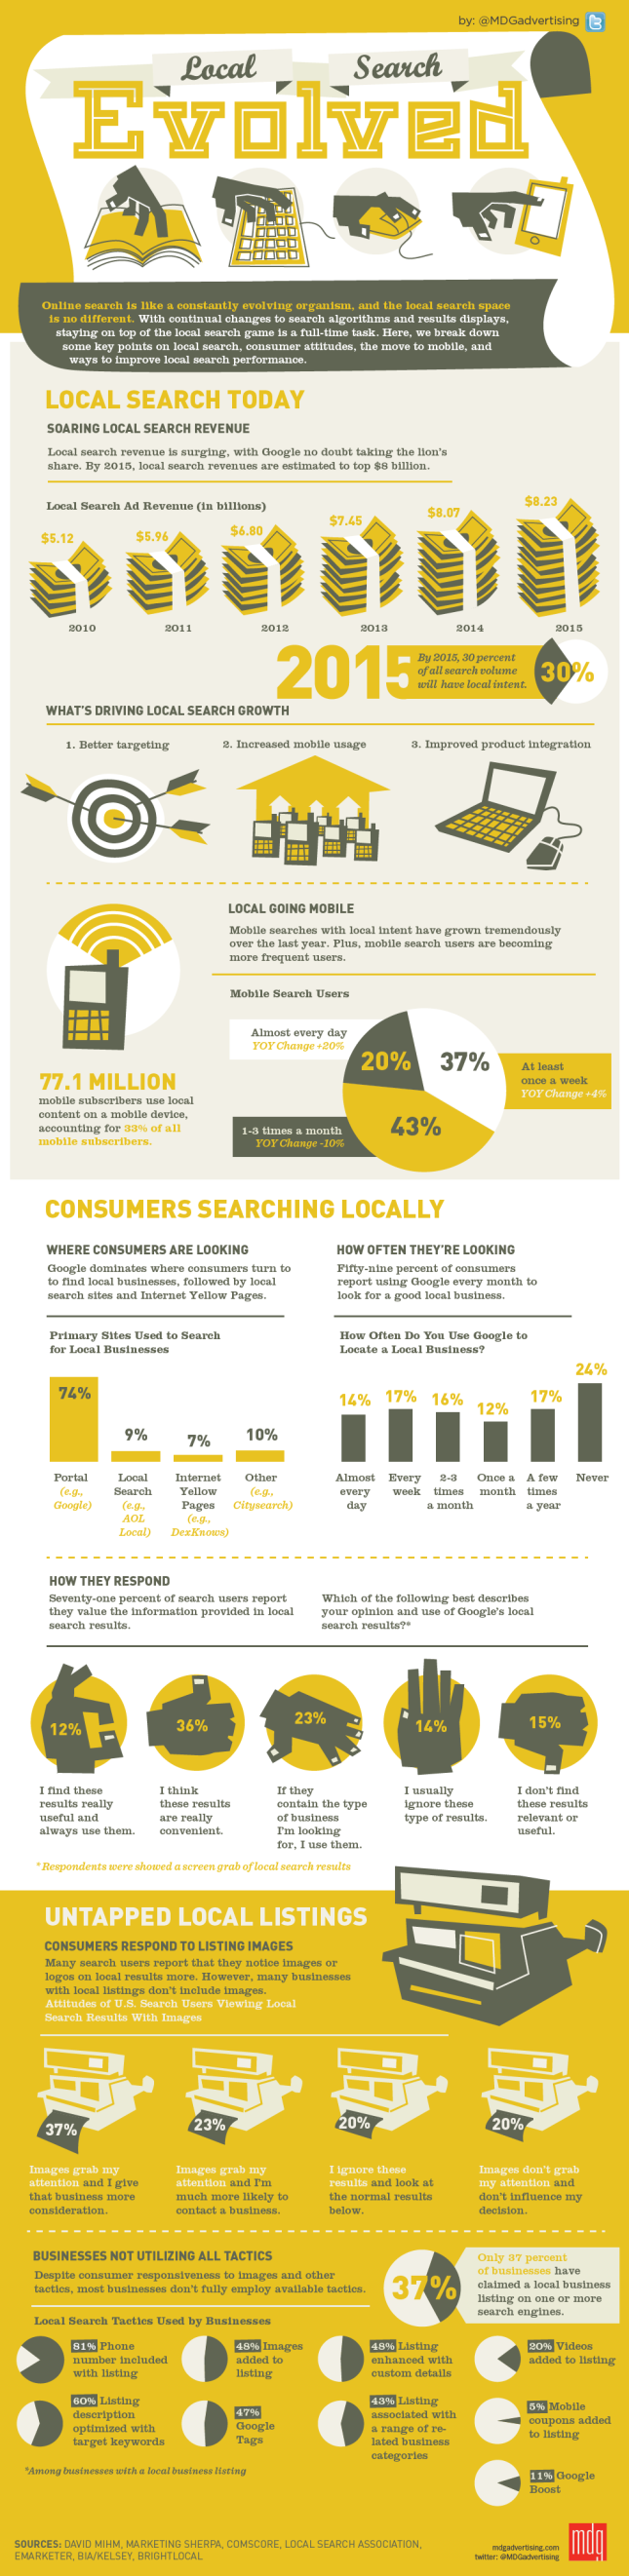 Local Search Evolved Infographic by MDG Advertising